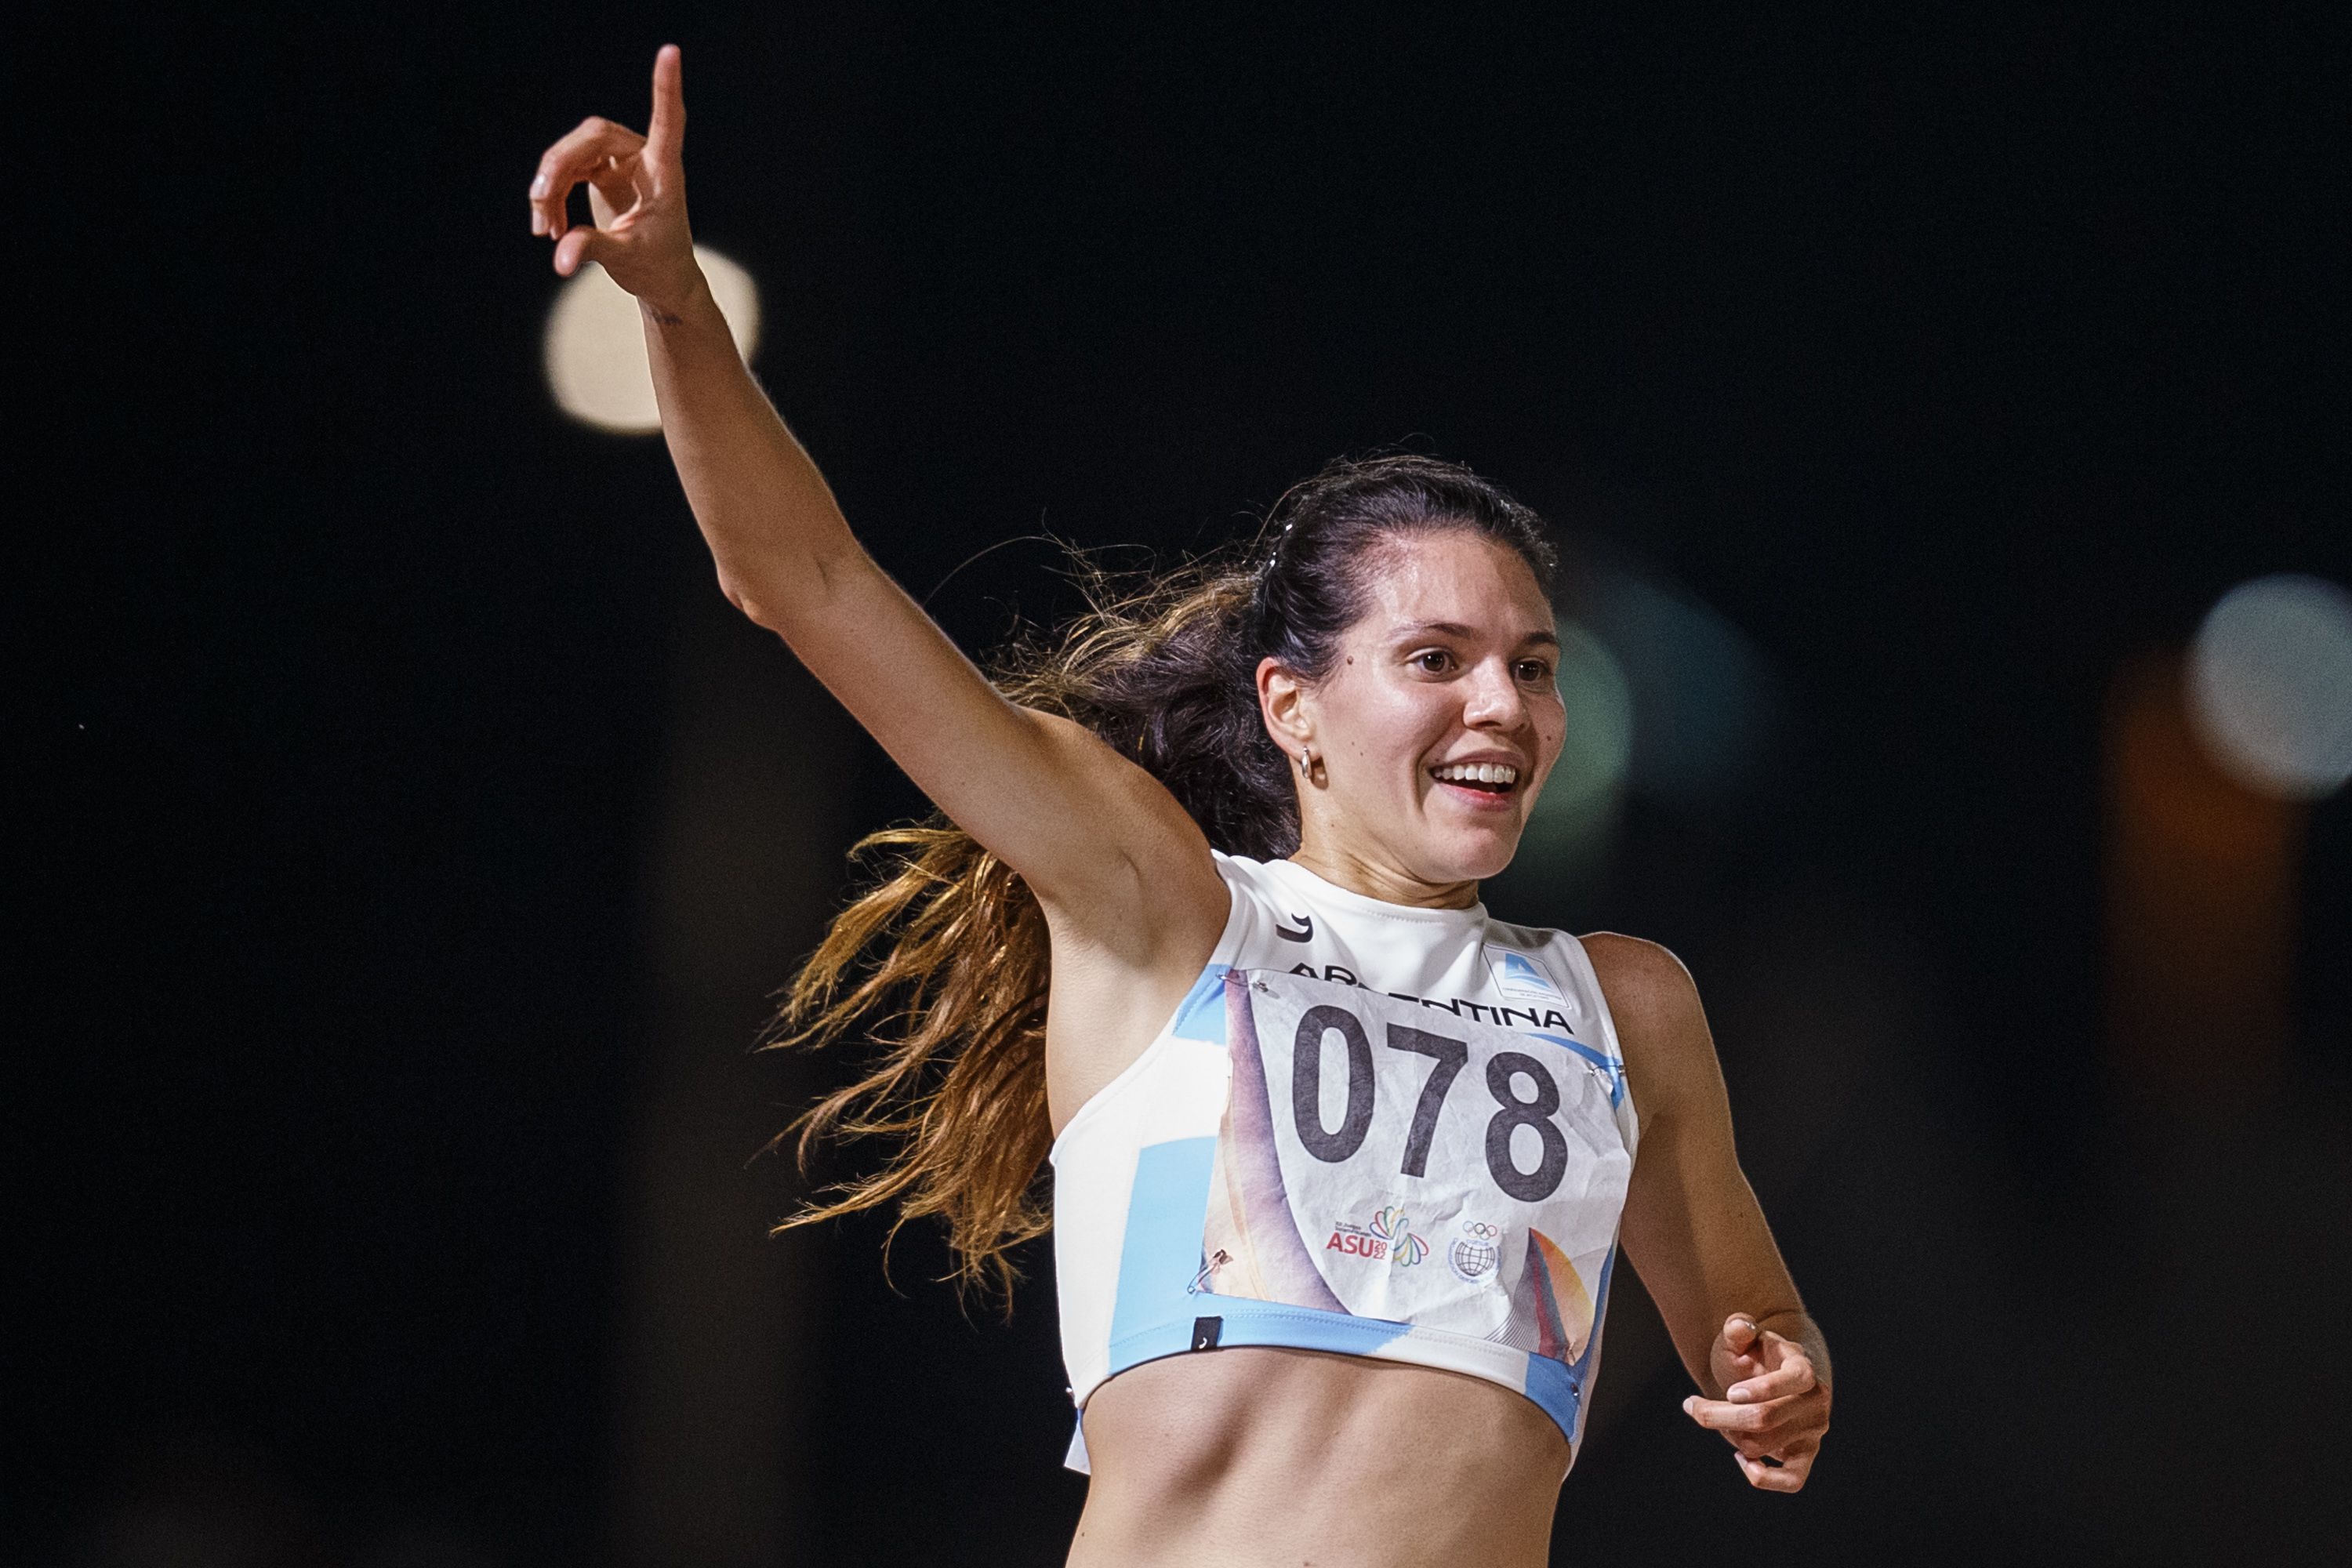 Argentina's Fedra Luna celebrates her 5000m win at the South American Games